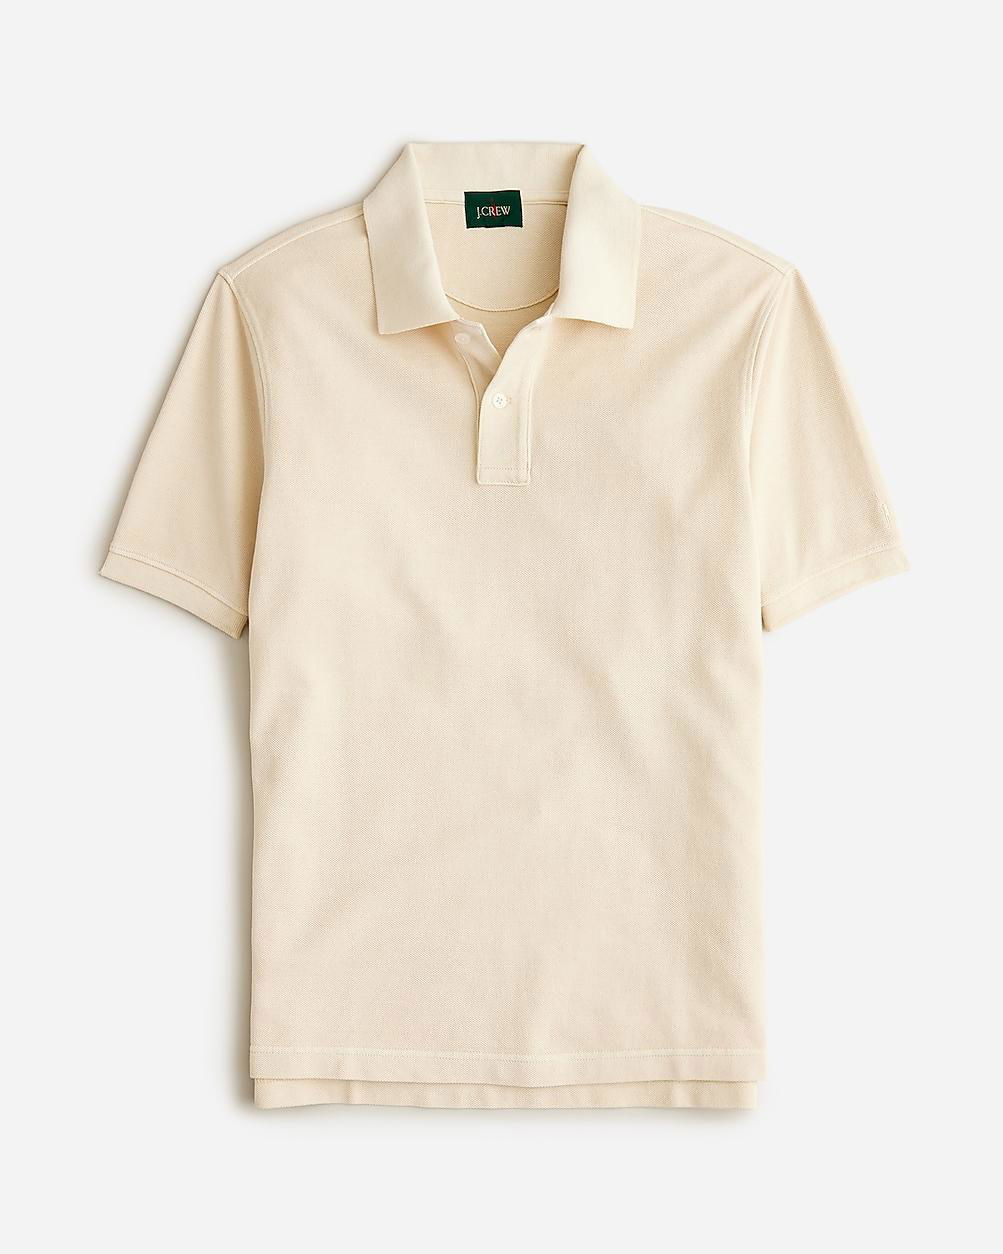 Tall washed piqué polo shirt by J.CREW